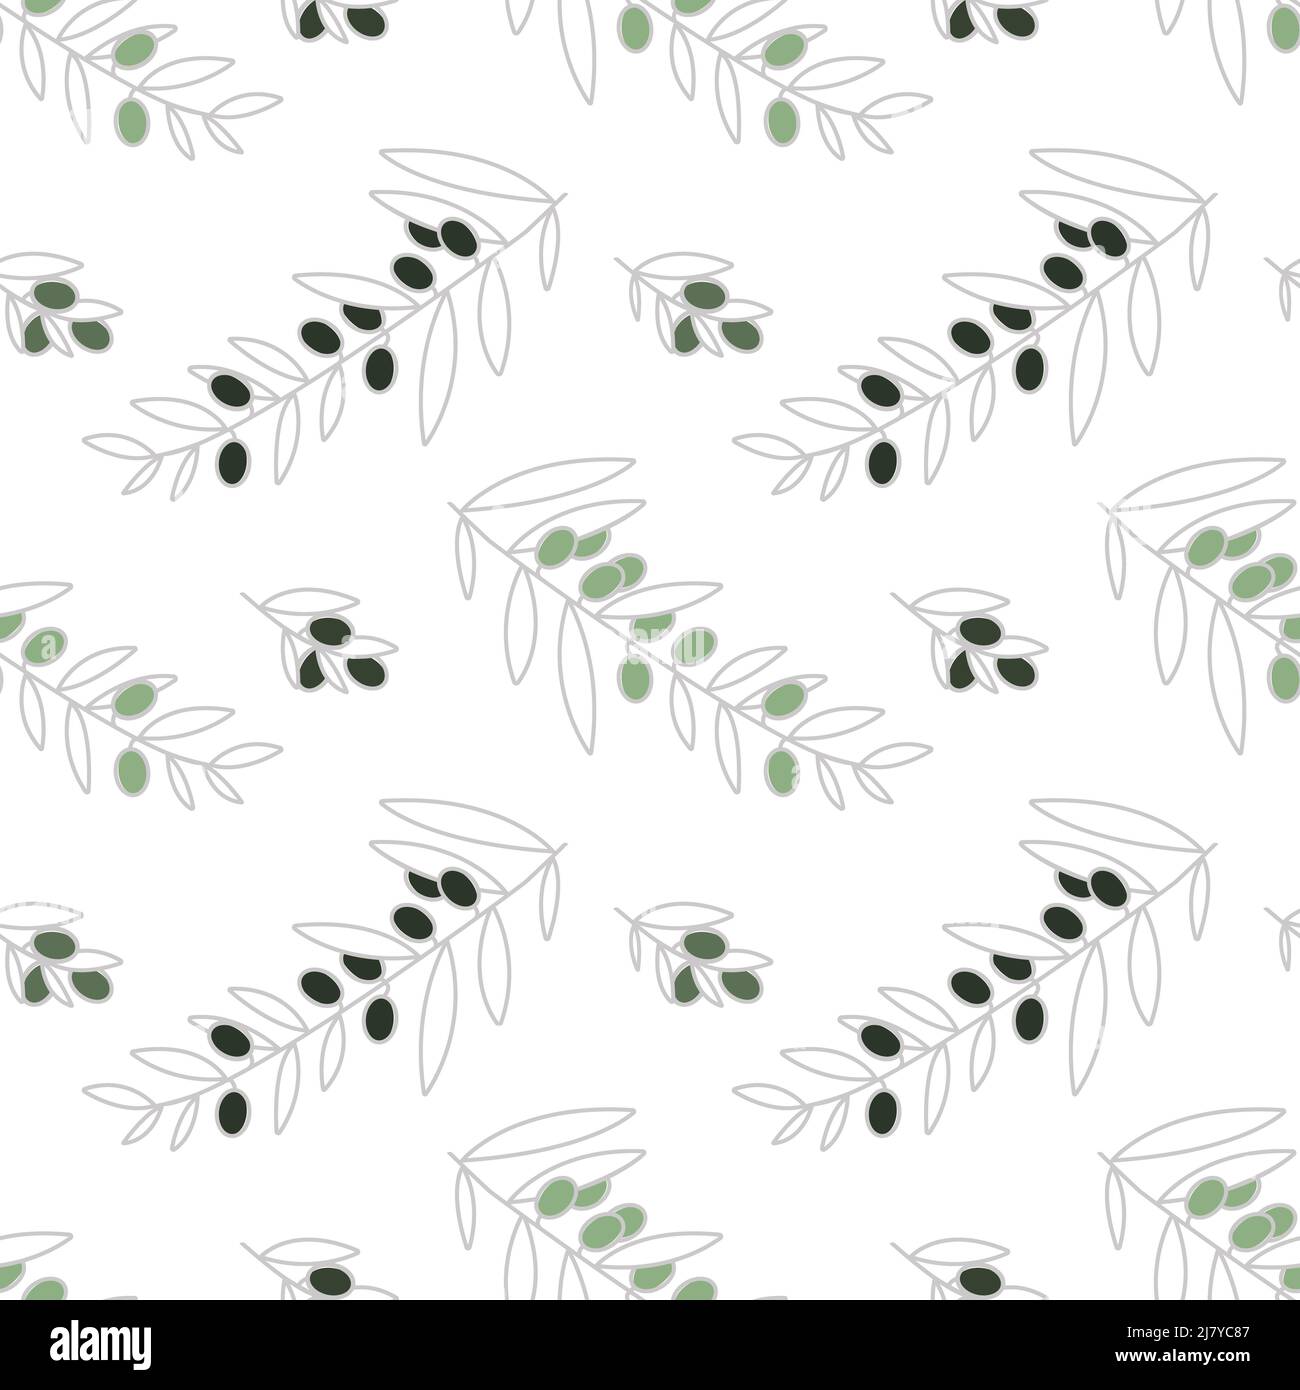 Olive seamless pattern. Olive branch with silvery leaves and green and black olives. Modern trendy design style, home decor, Scandinavian minimalism. Stock Photo